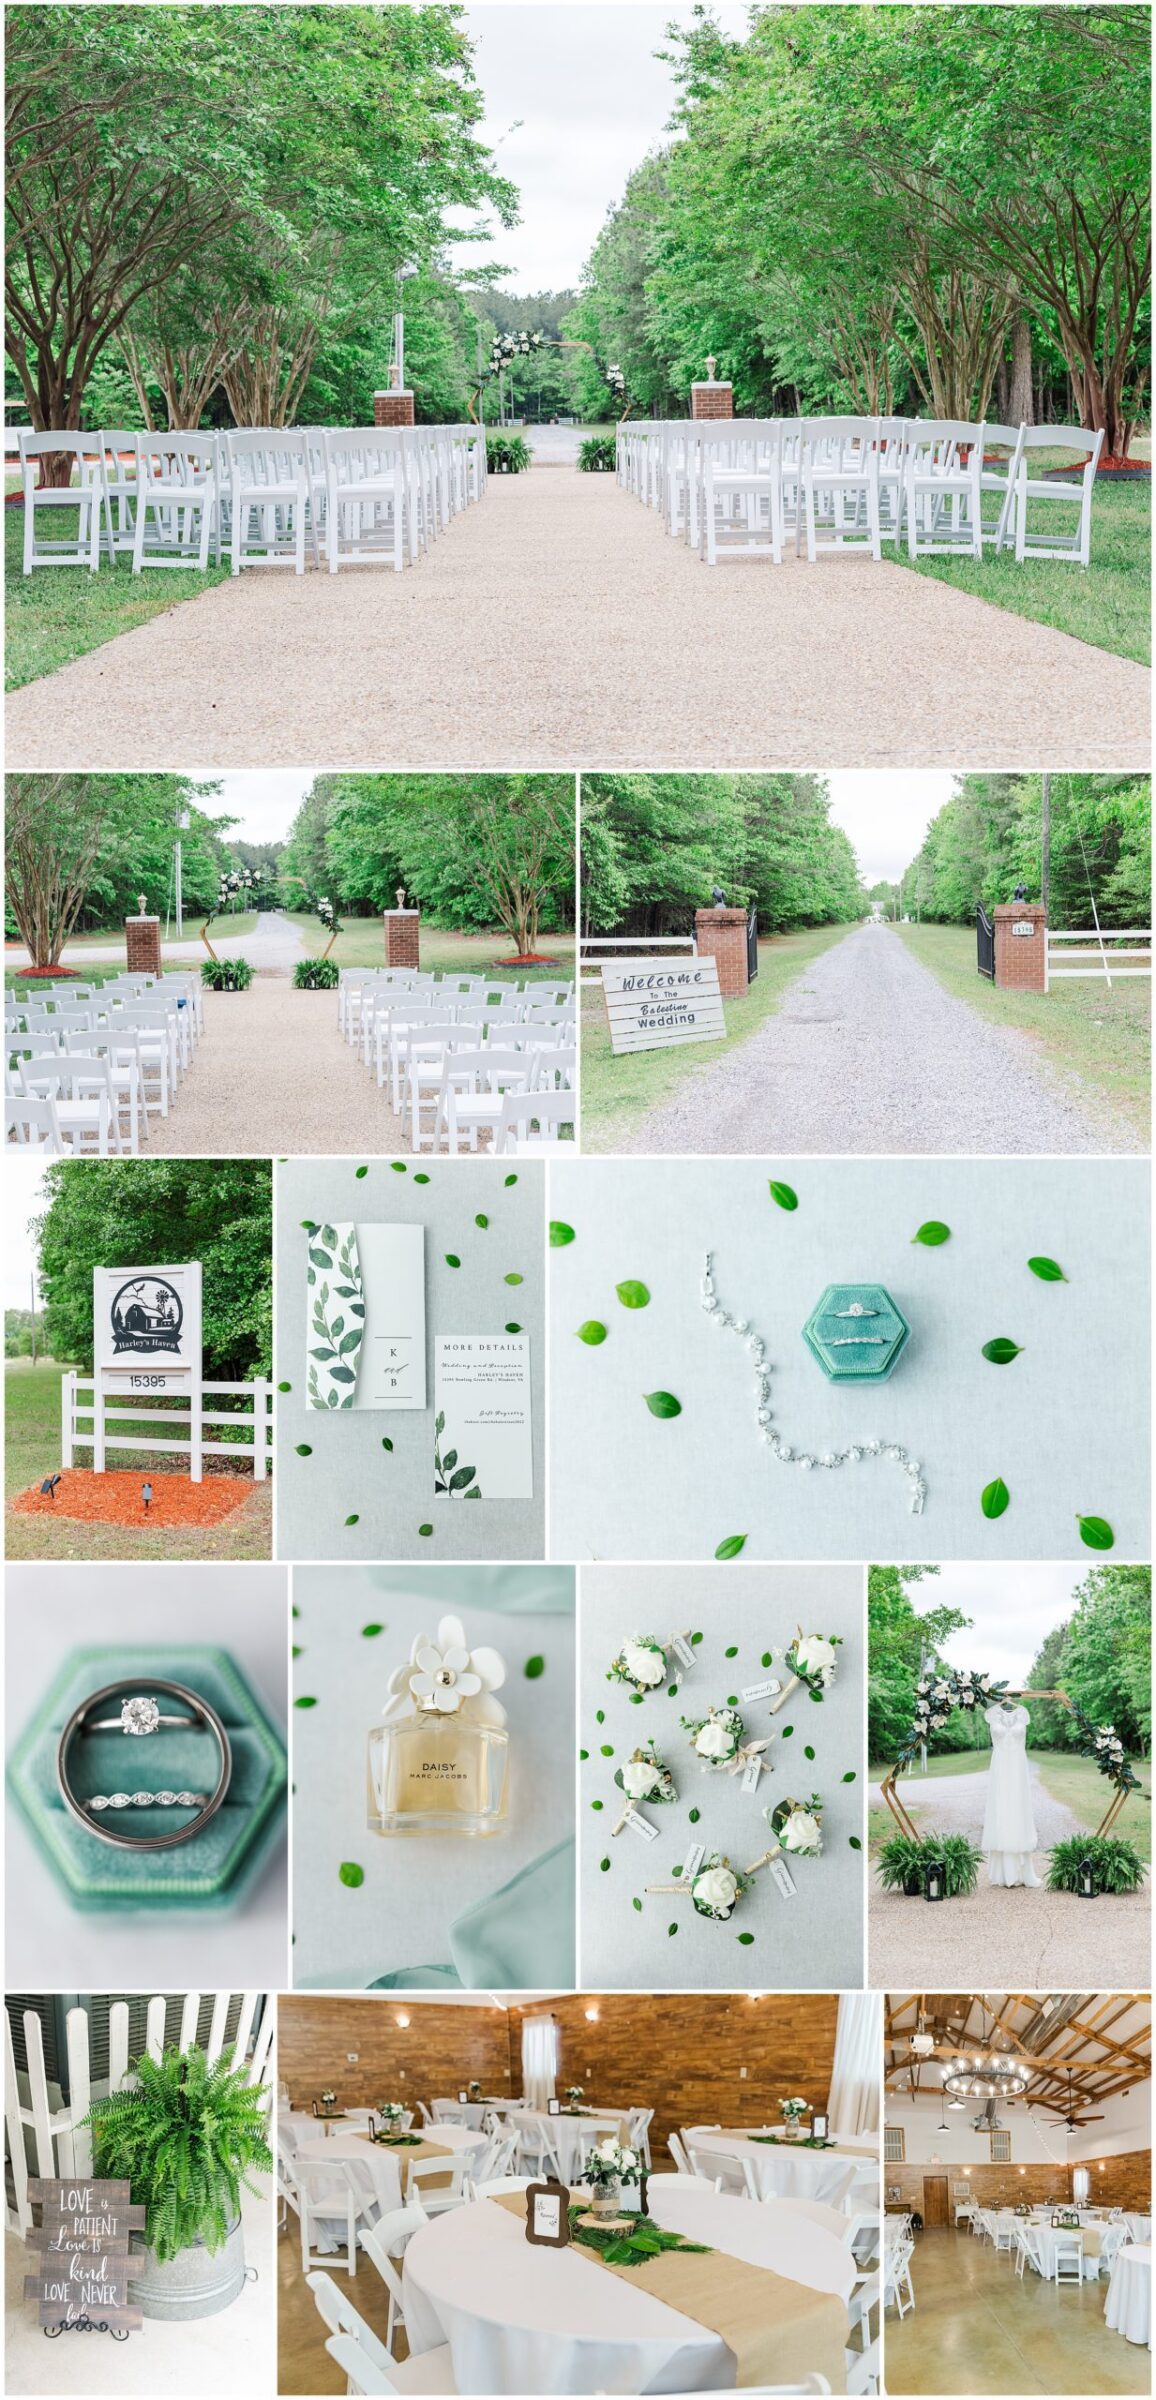 Venue and detail collage of Katelyn and Brandon's wedding day at Harley's Haven